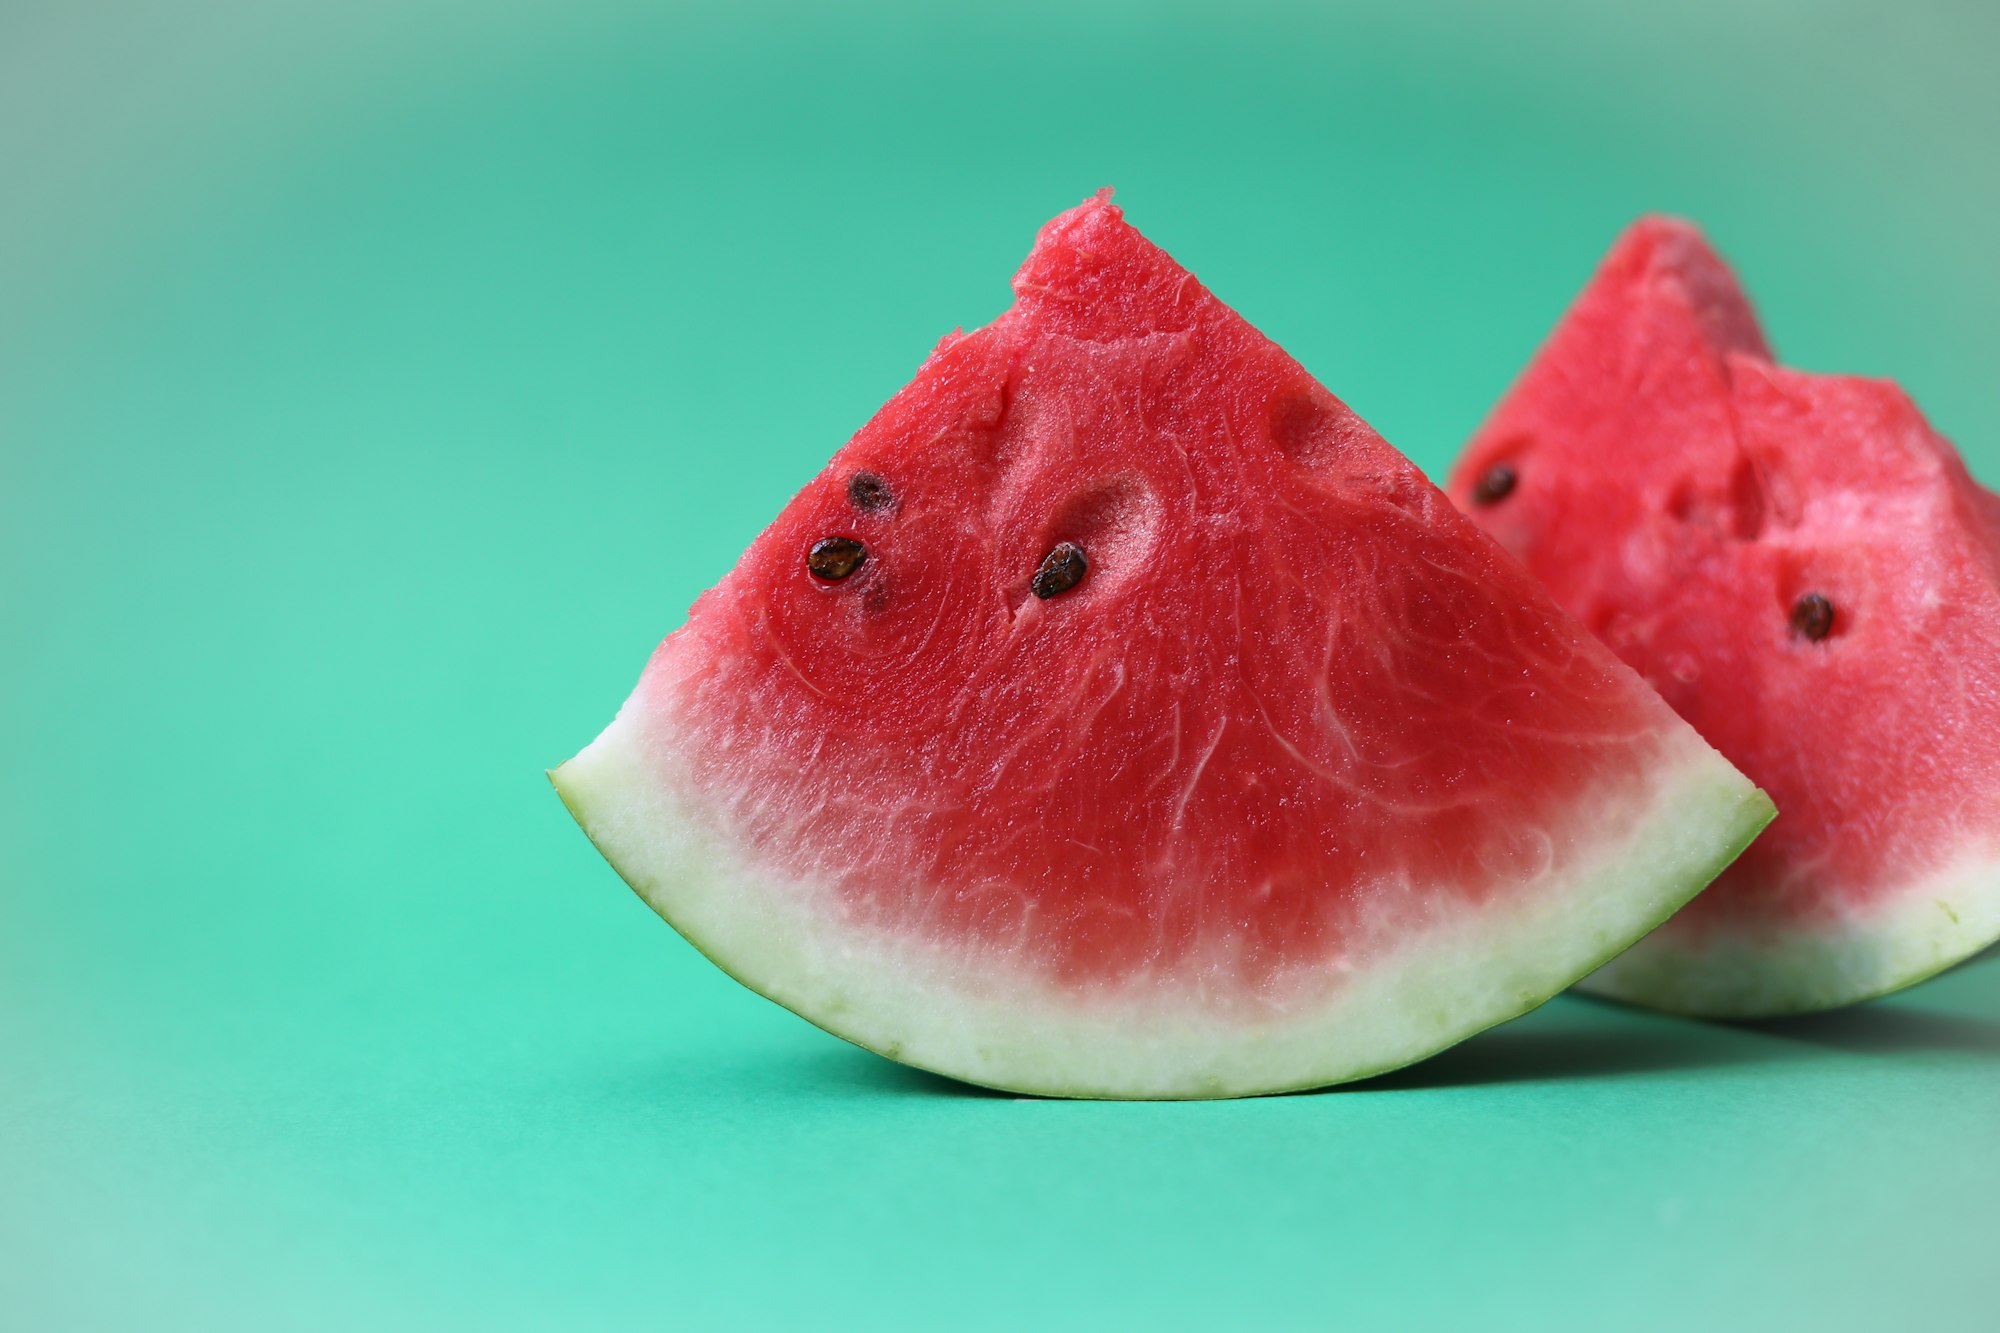 Watermelon slices on green background